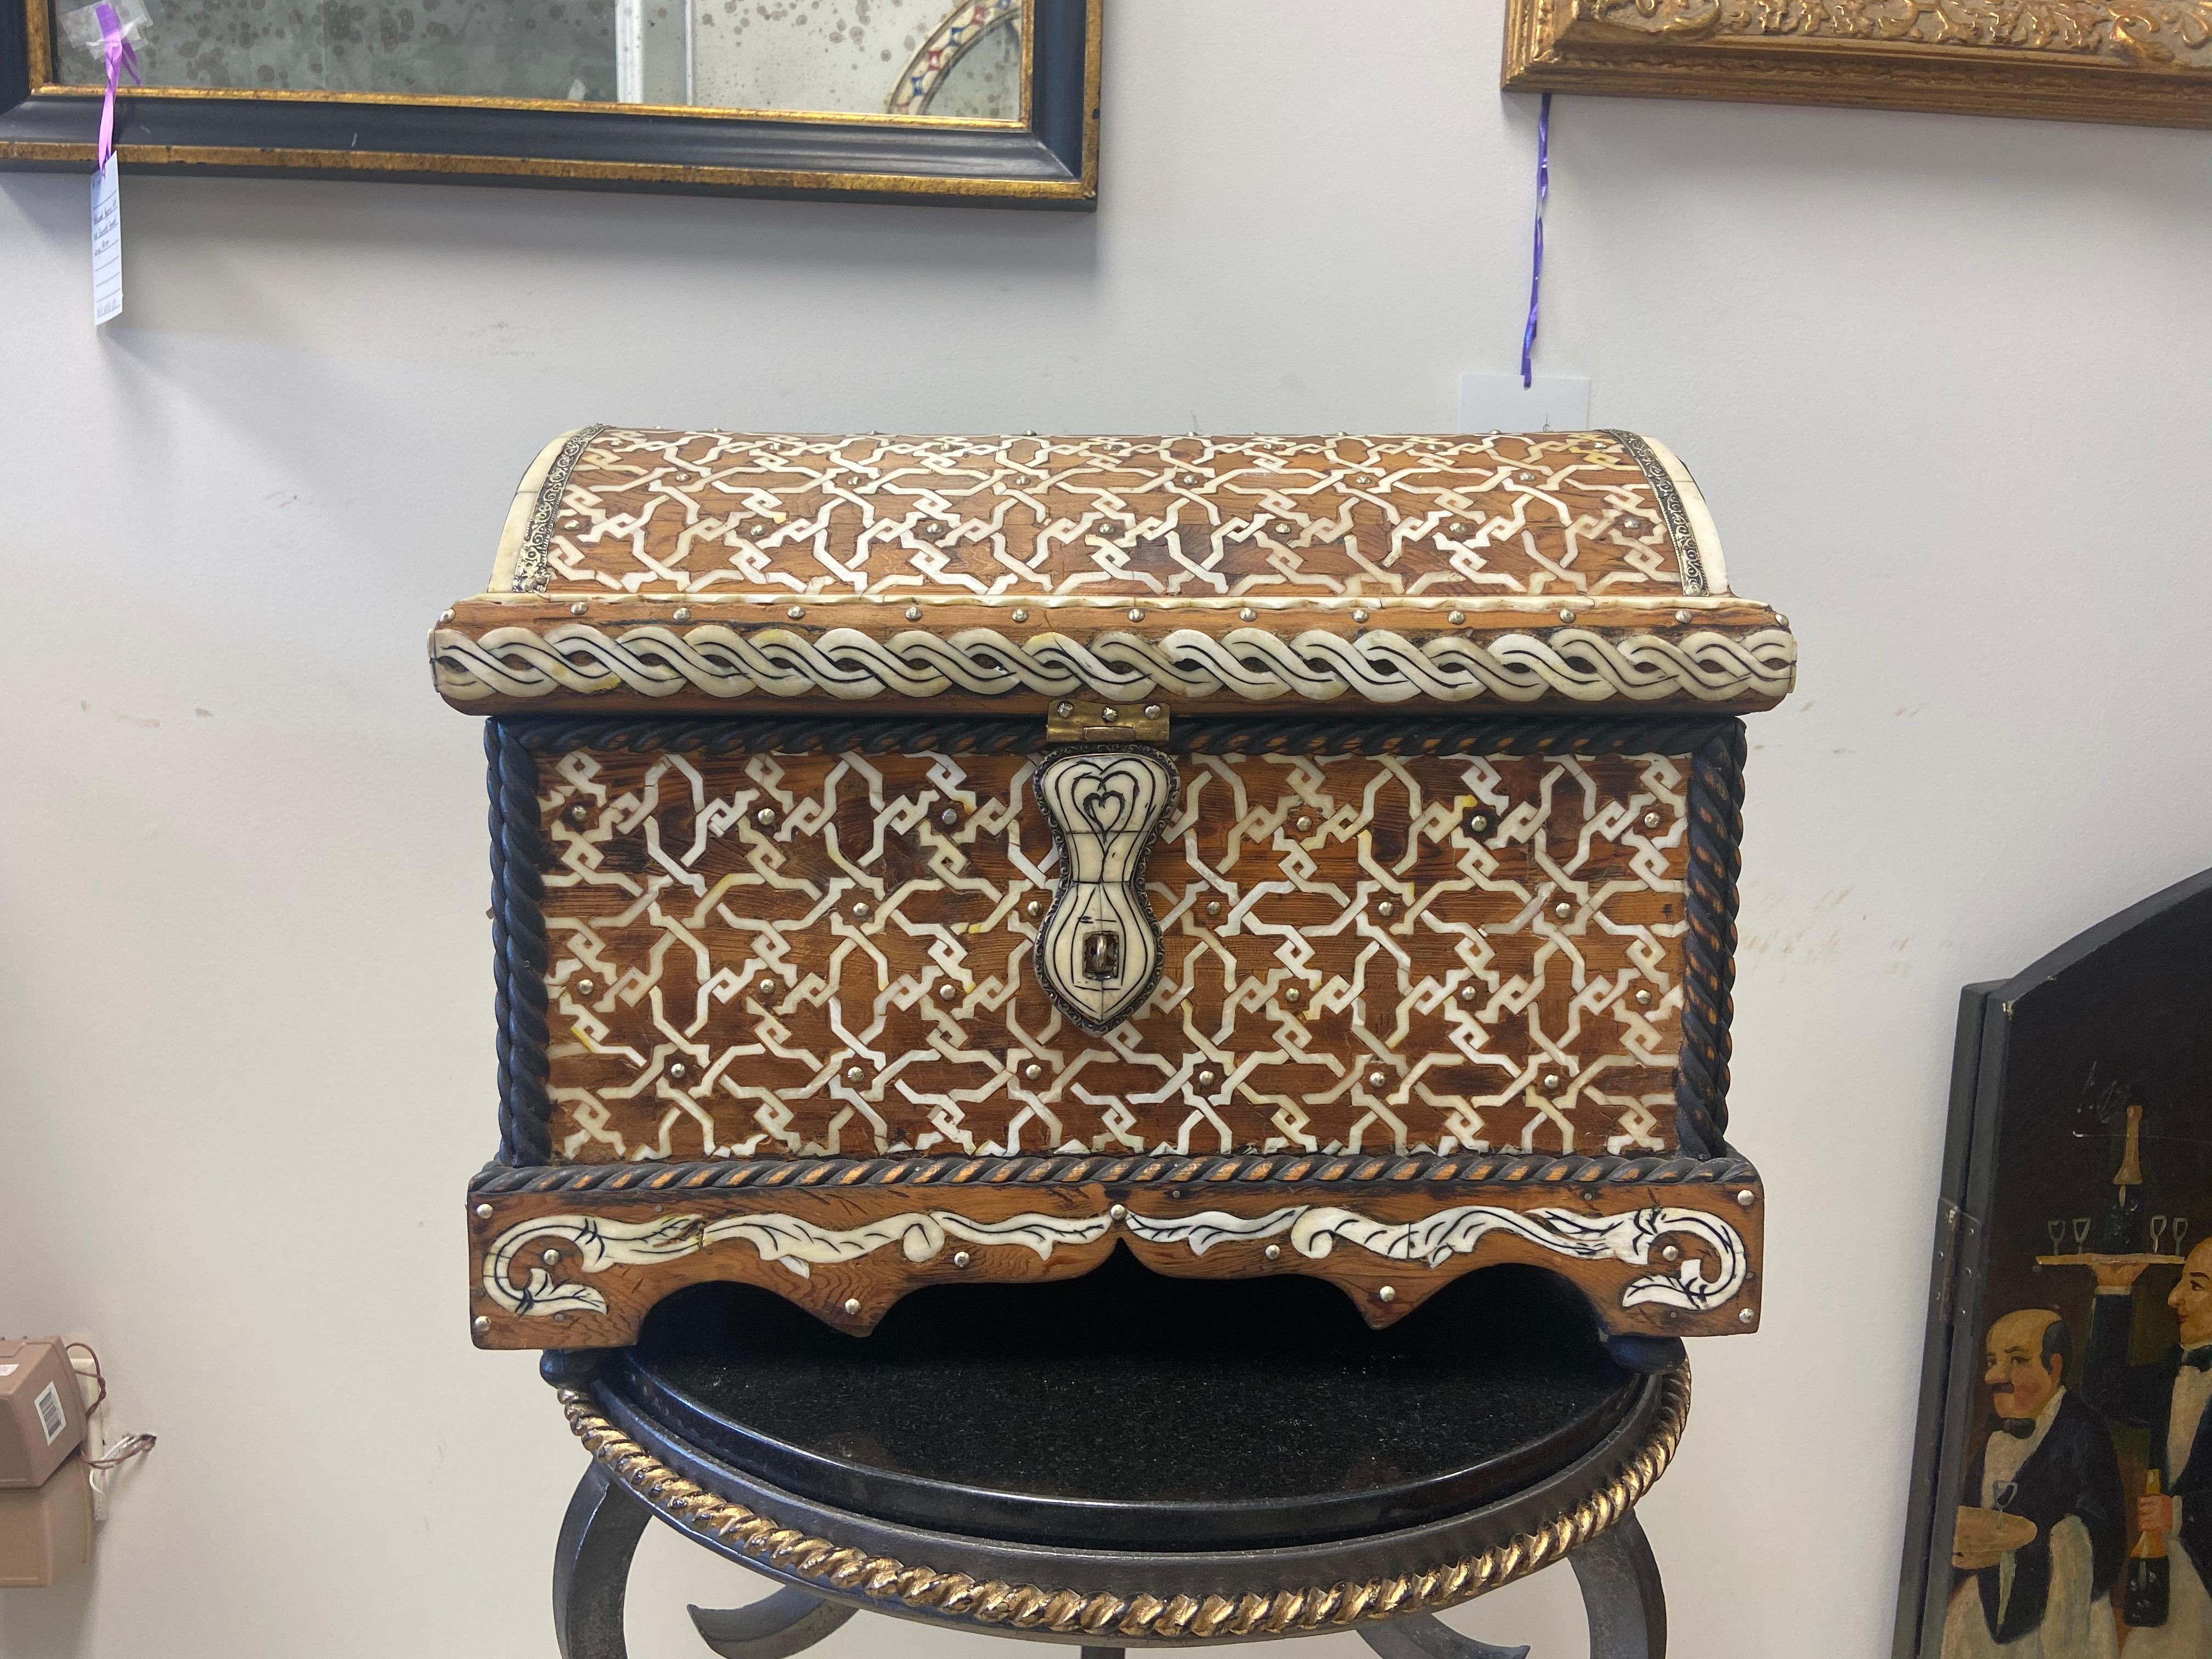 Midcentury bone inlaid chest box or jewelry casket mesmerizing decorative patterns and extraordinary sculptural and design details provide this authentic handcrafted Moroccan chest with an enduring sense of beauty. Generously crafted from beechwood